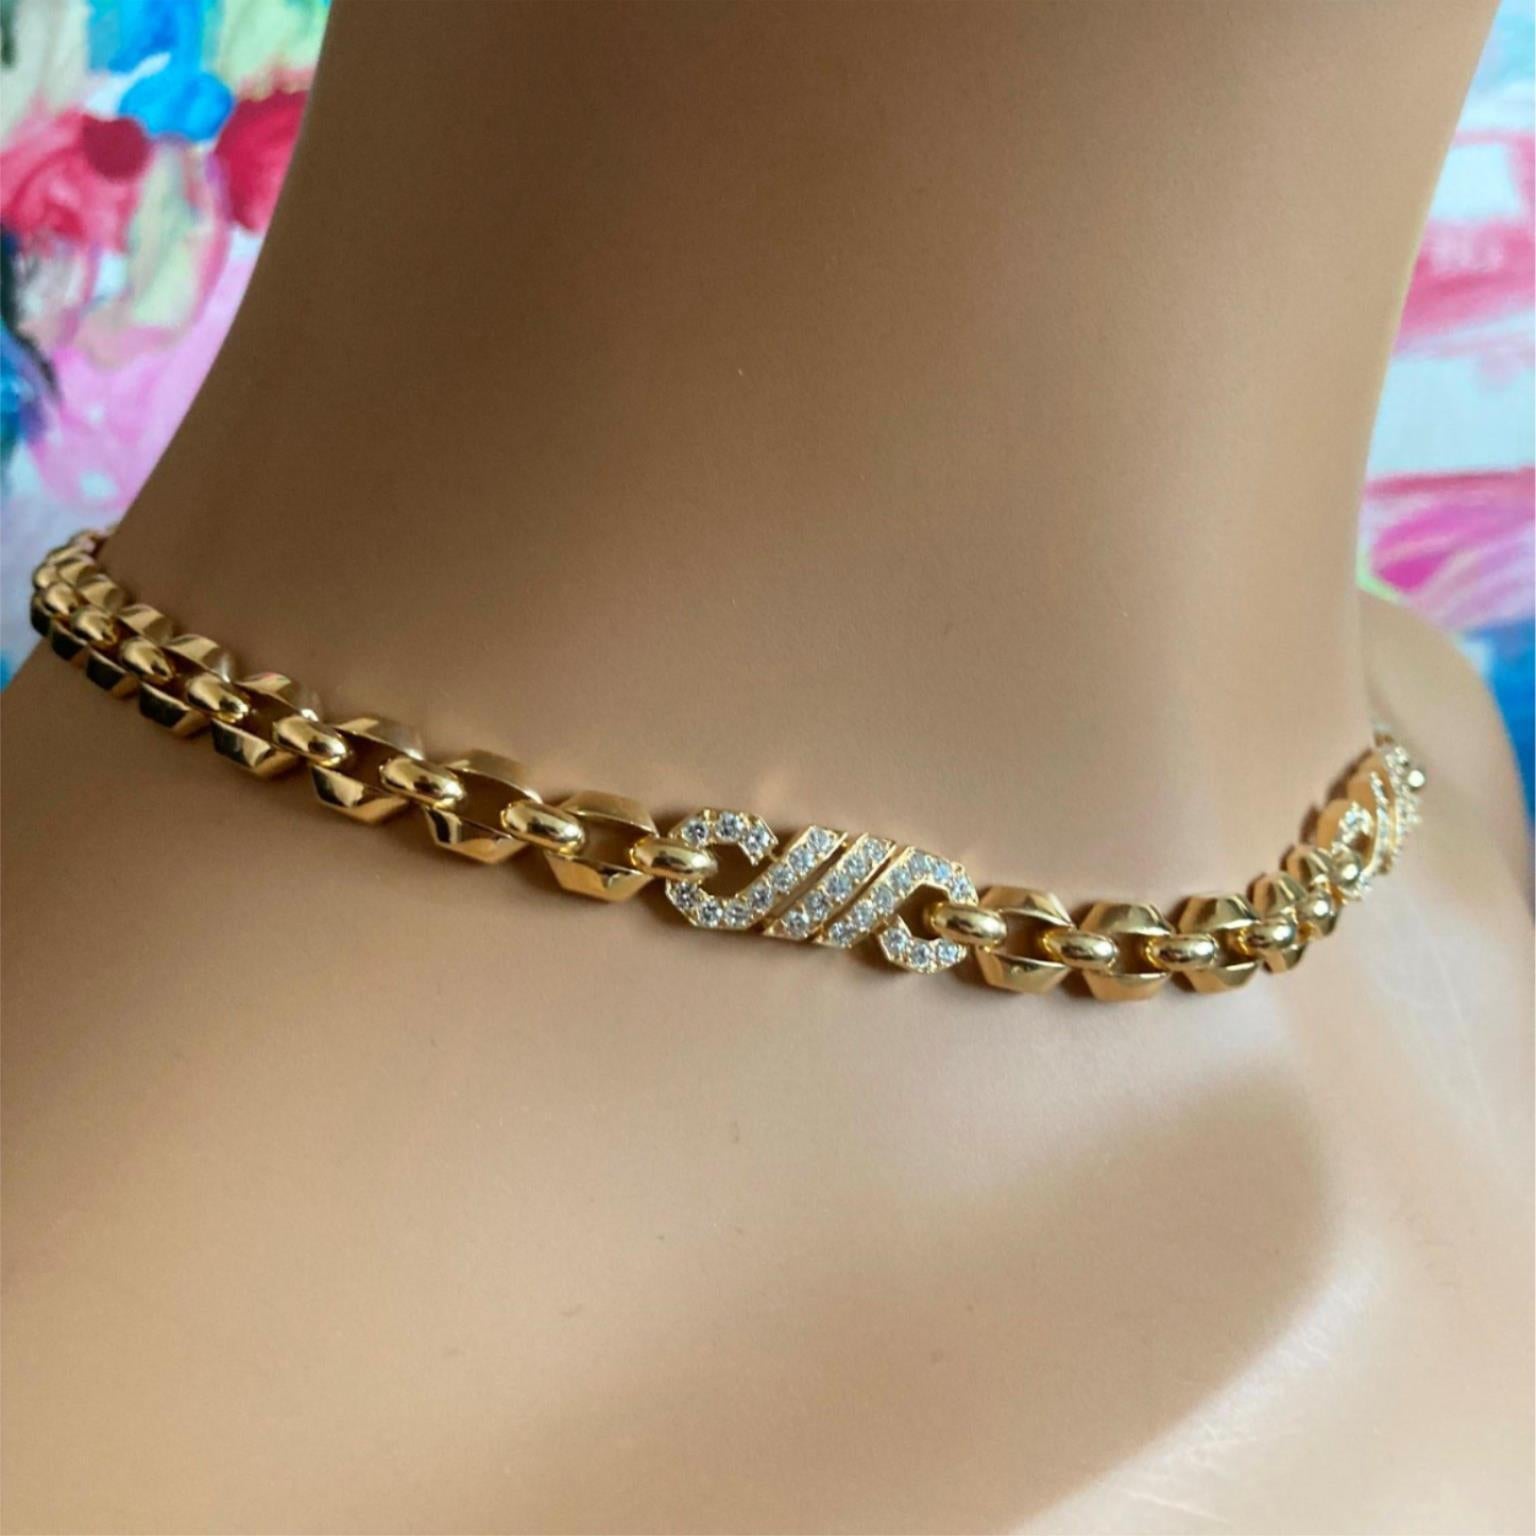 Cartier Fox Trot Diamond Yellow Gold Necklace In Excellent Condition For Sale In Holland, PA